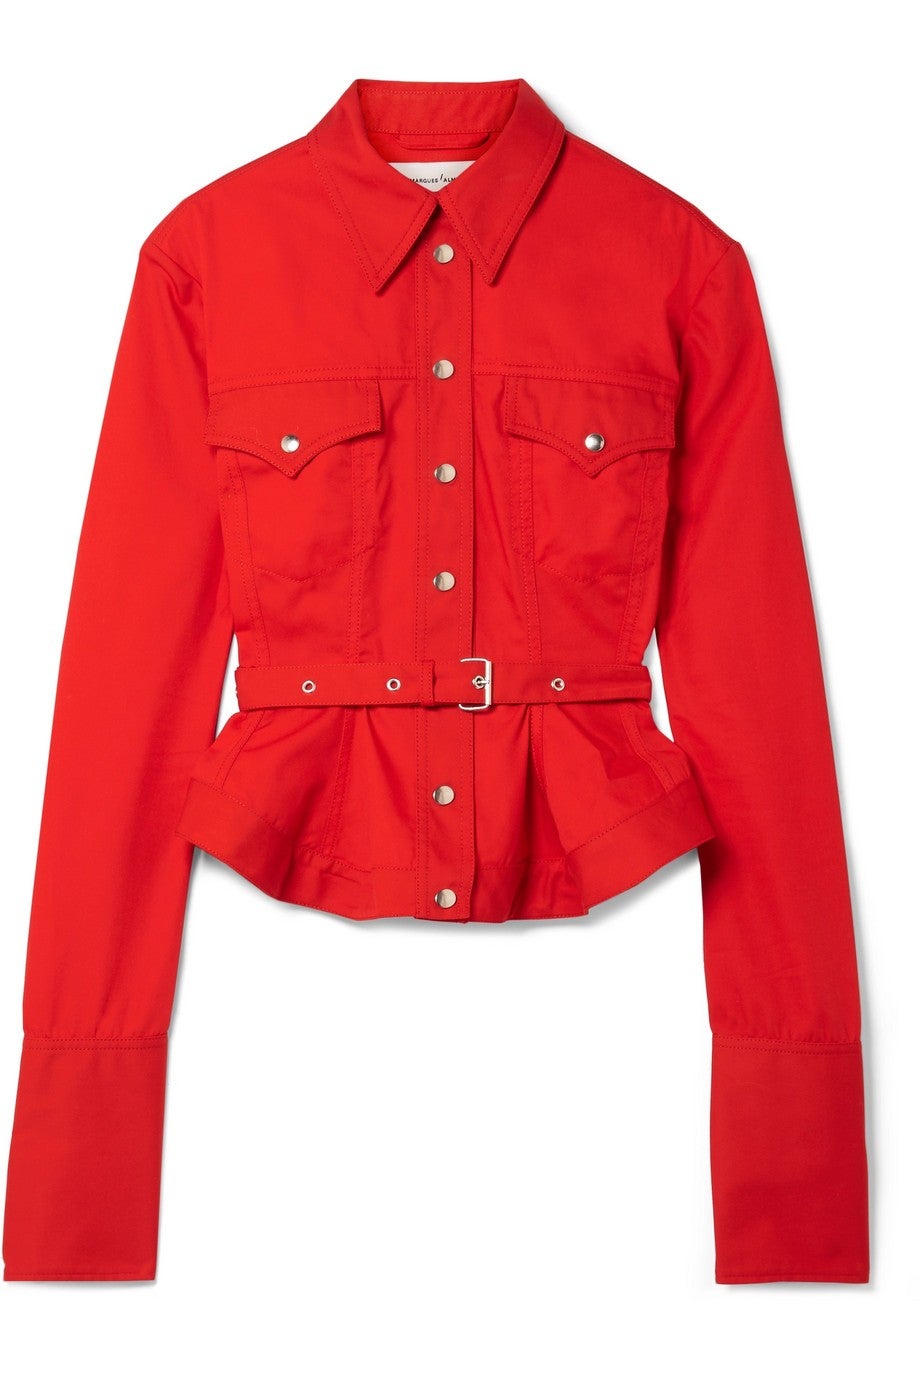 Marques Almeida red belted jacket